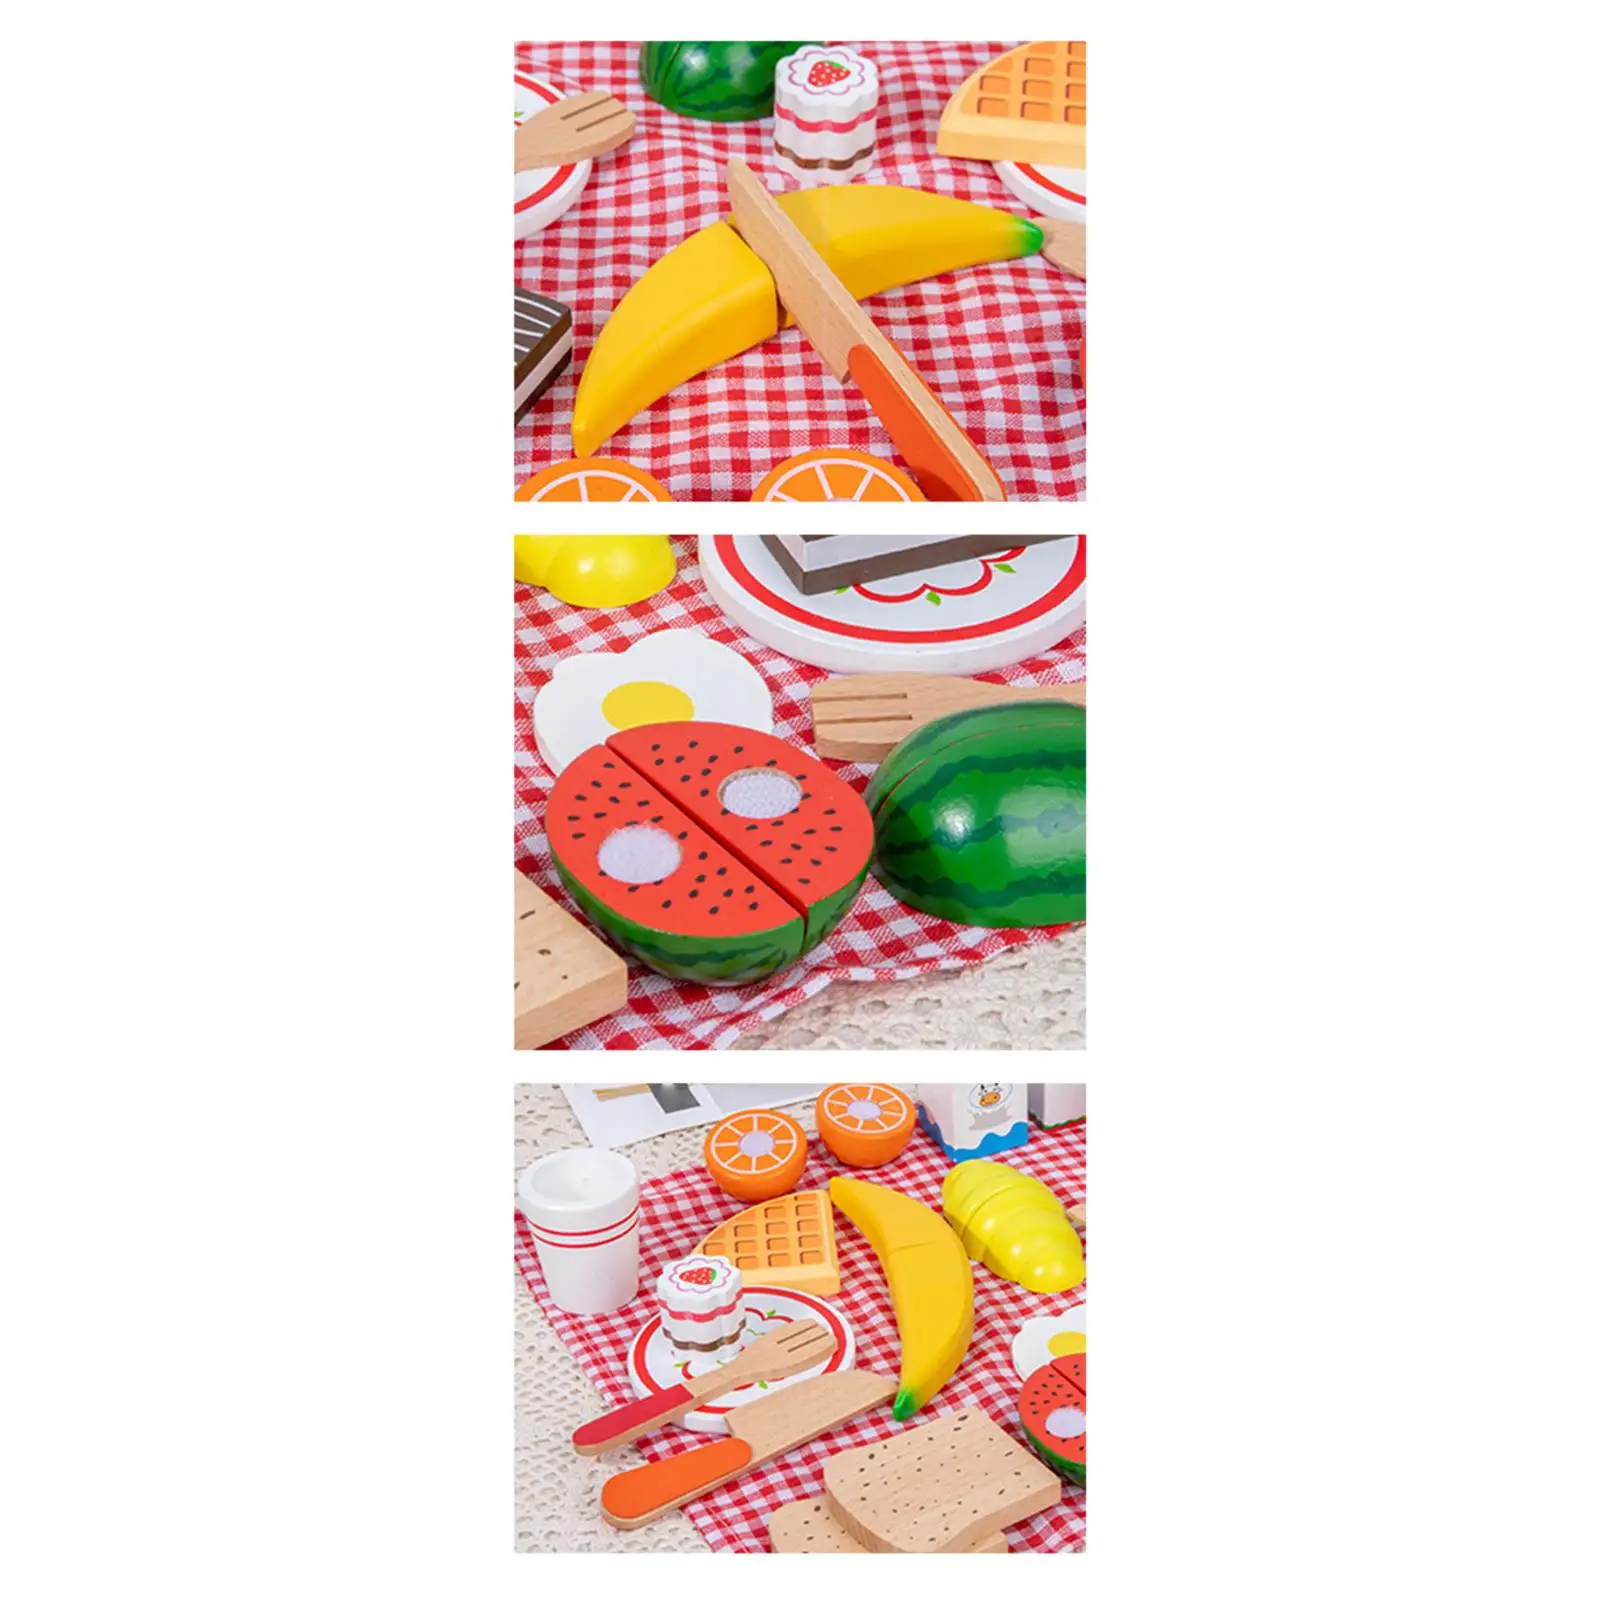 Simulation Cutting Fruits Play Set Pretend Play Toy with Basket Gifts Fun Toy